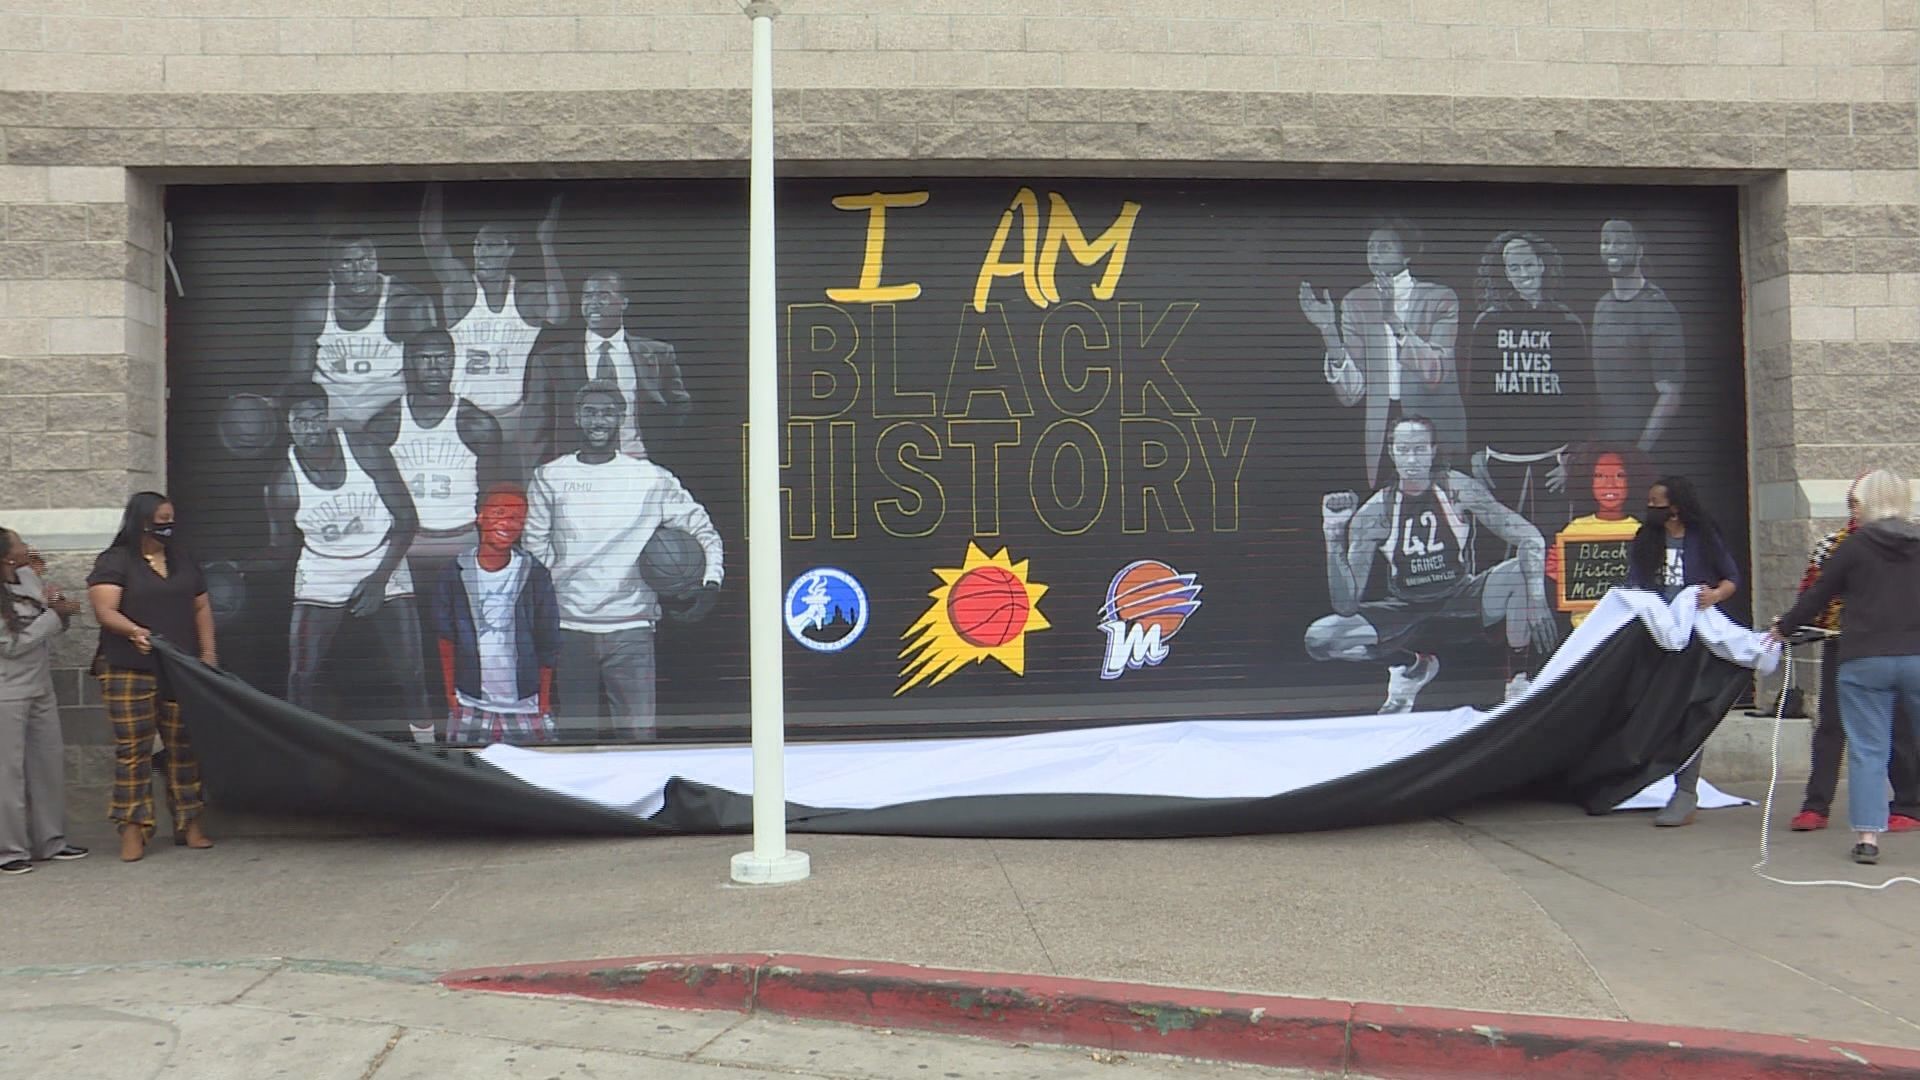 Each mural is designed for viewers to think about the accomplishment those enshrined in the mural achieved.